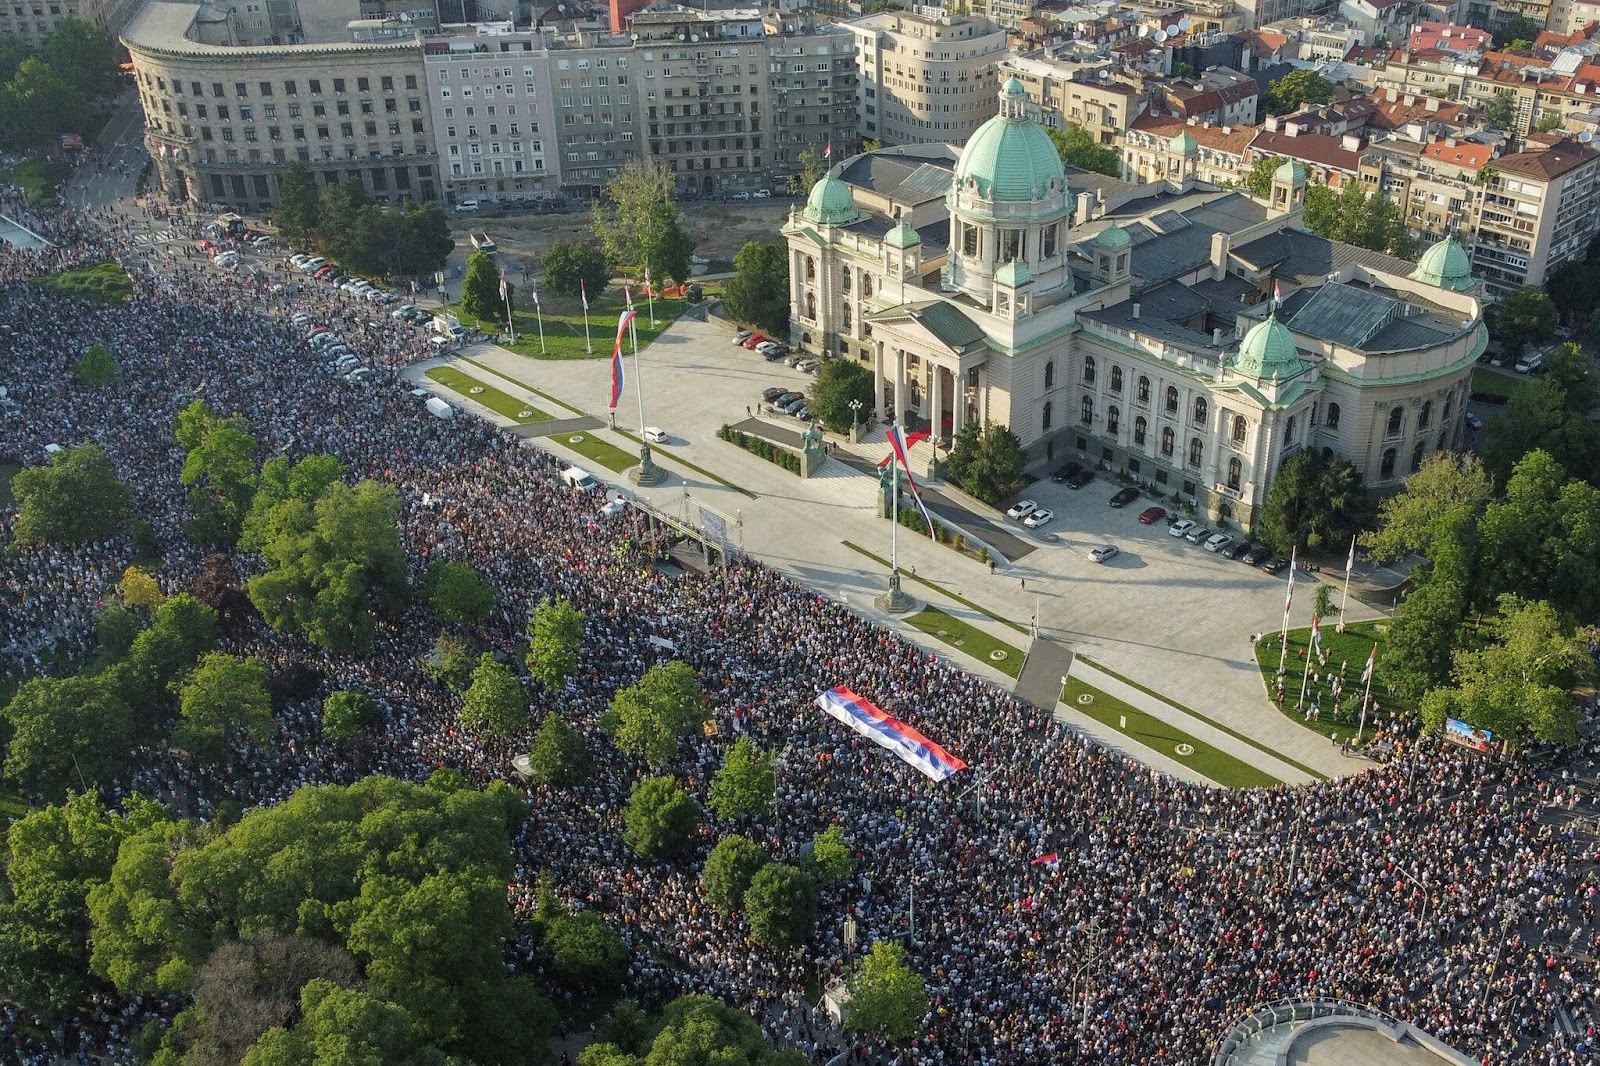 The protests on Saturday were the biggest demonstrations in Belgrade since the unrest that toppled then-president Slobodan Milosevic in 2000